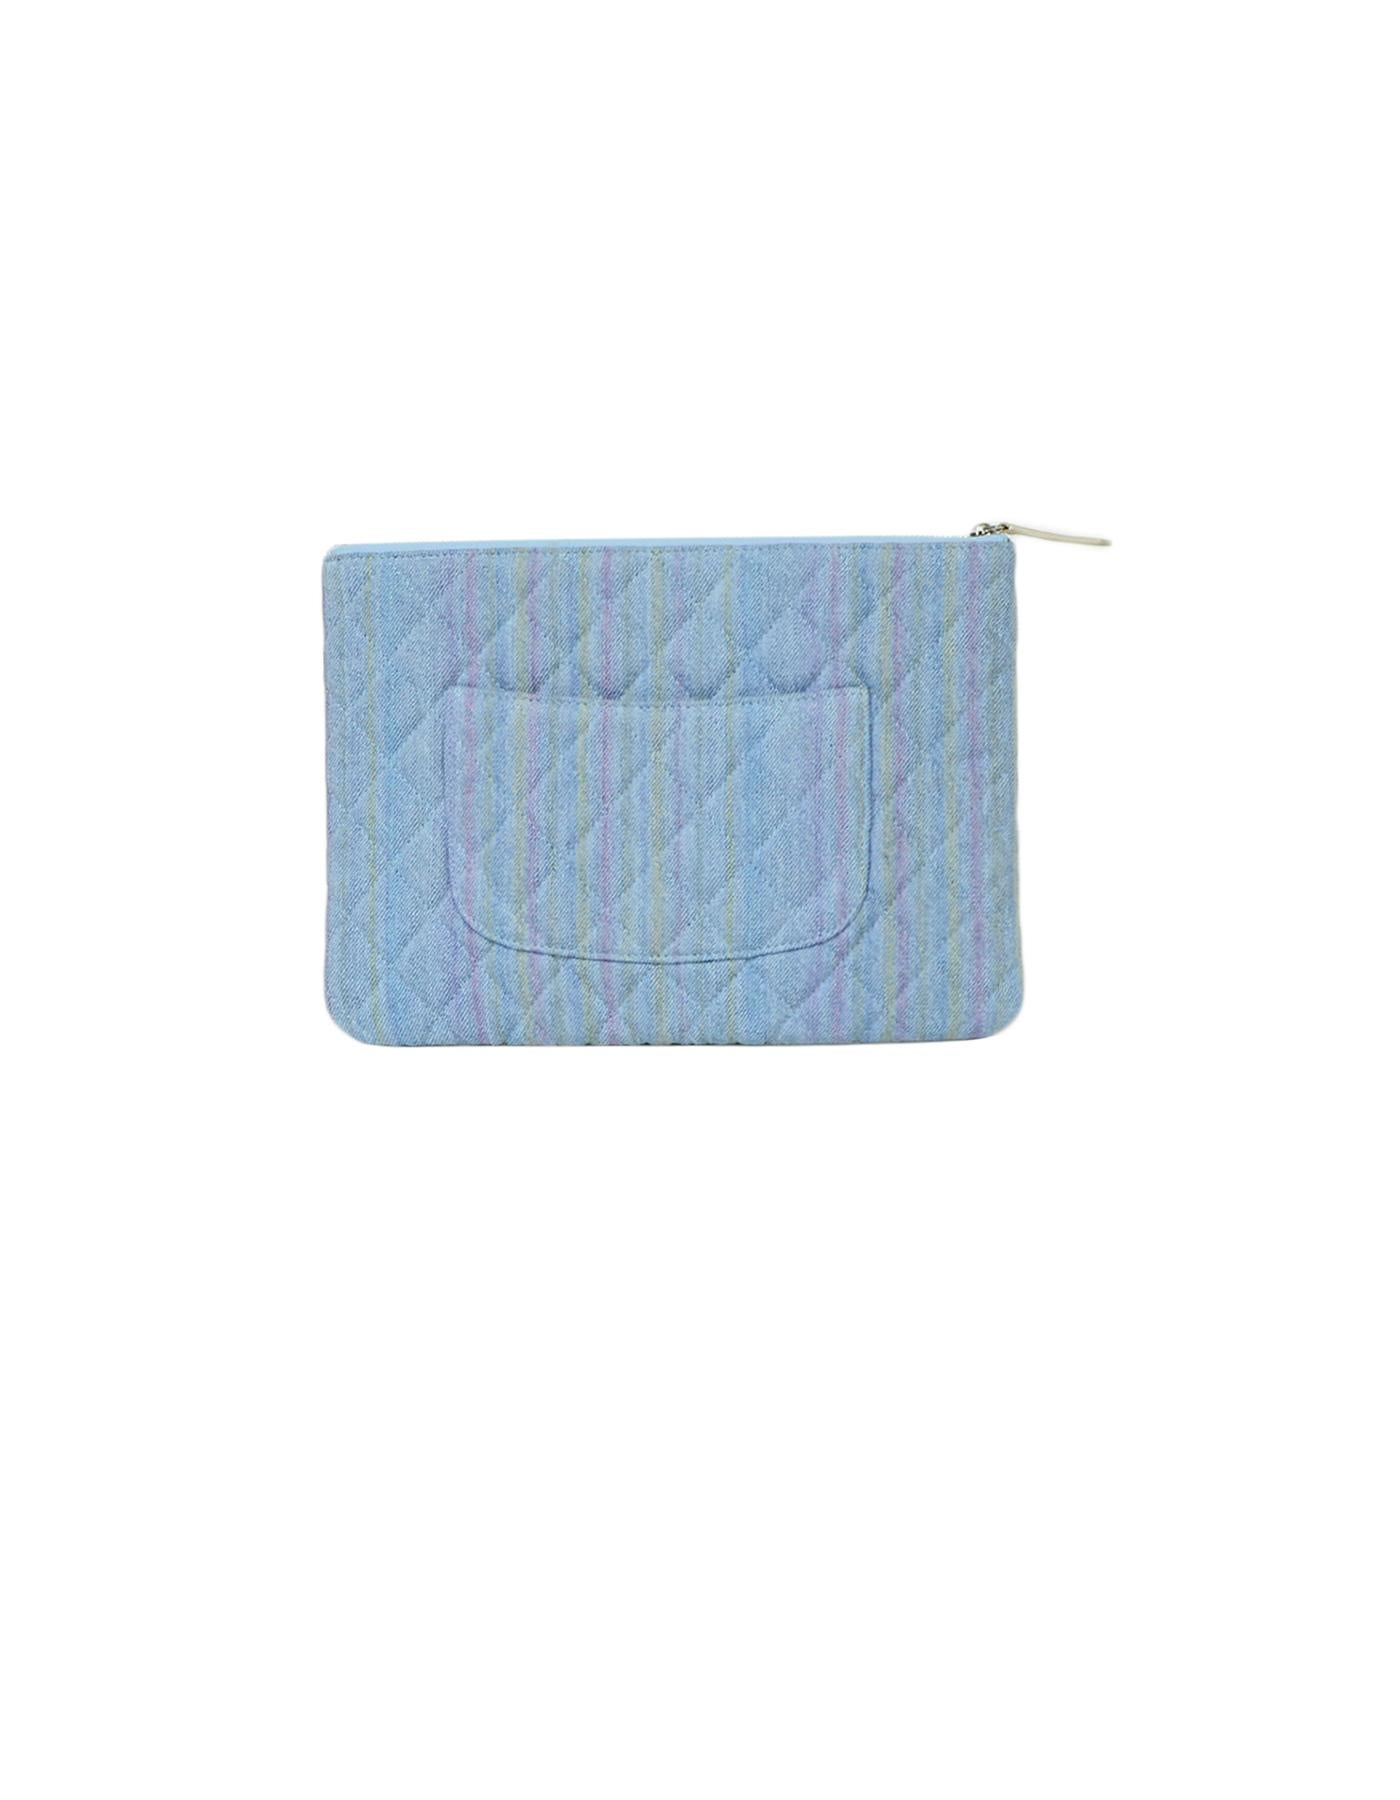 Blue Chanel Denim Quilted O-Case Zip Top Pouch with Rainbow Stripe Wash